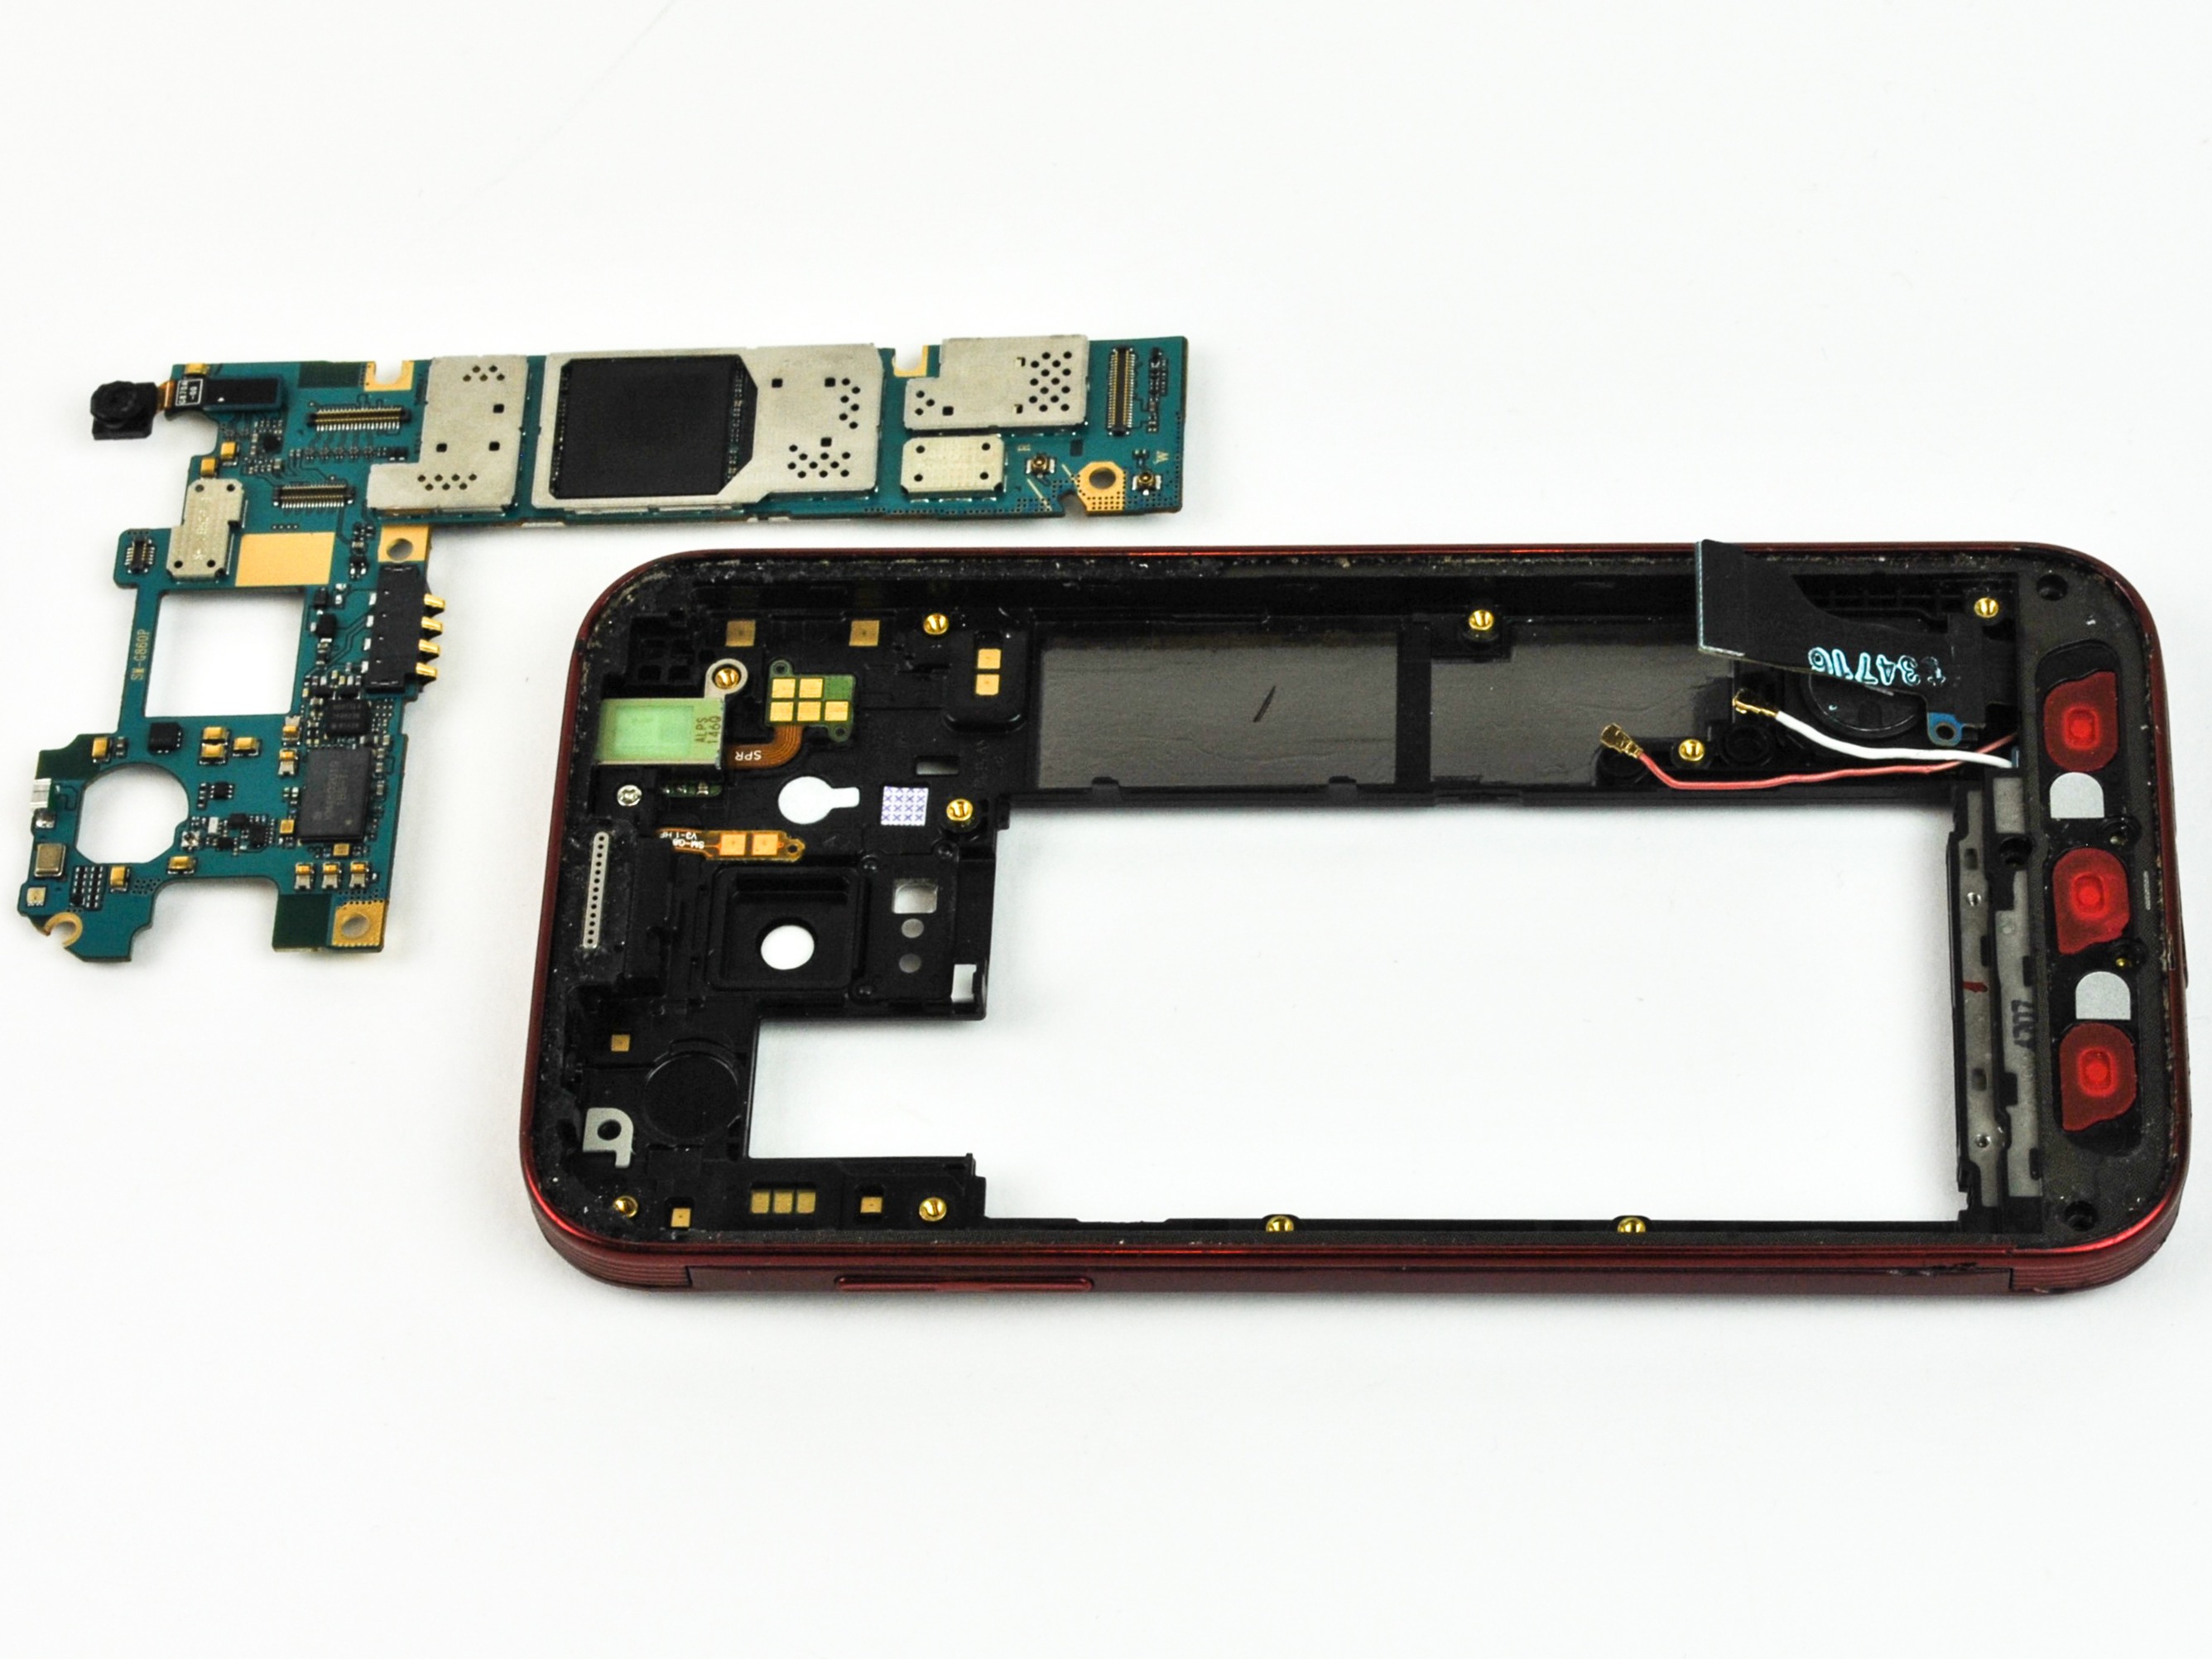 samsung s5 repair picture guide